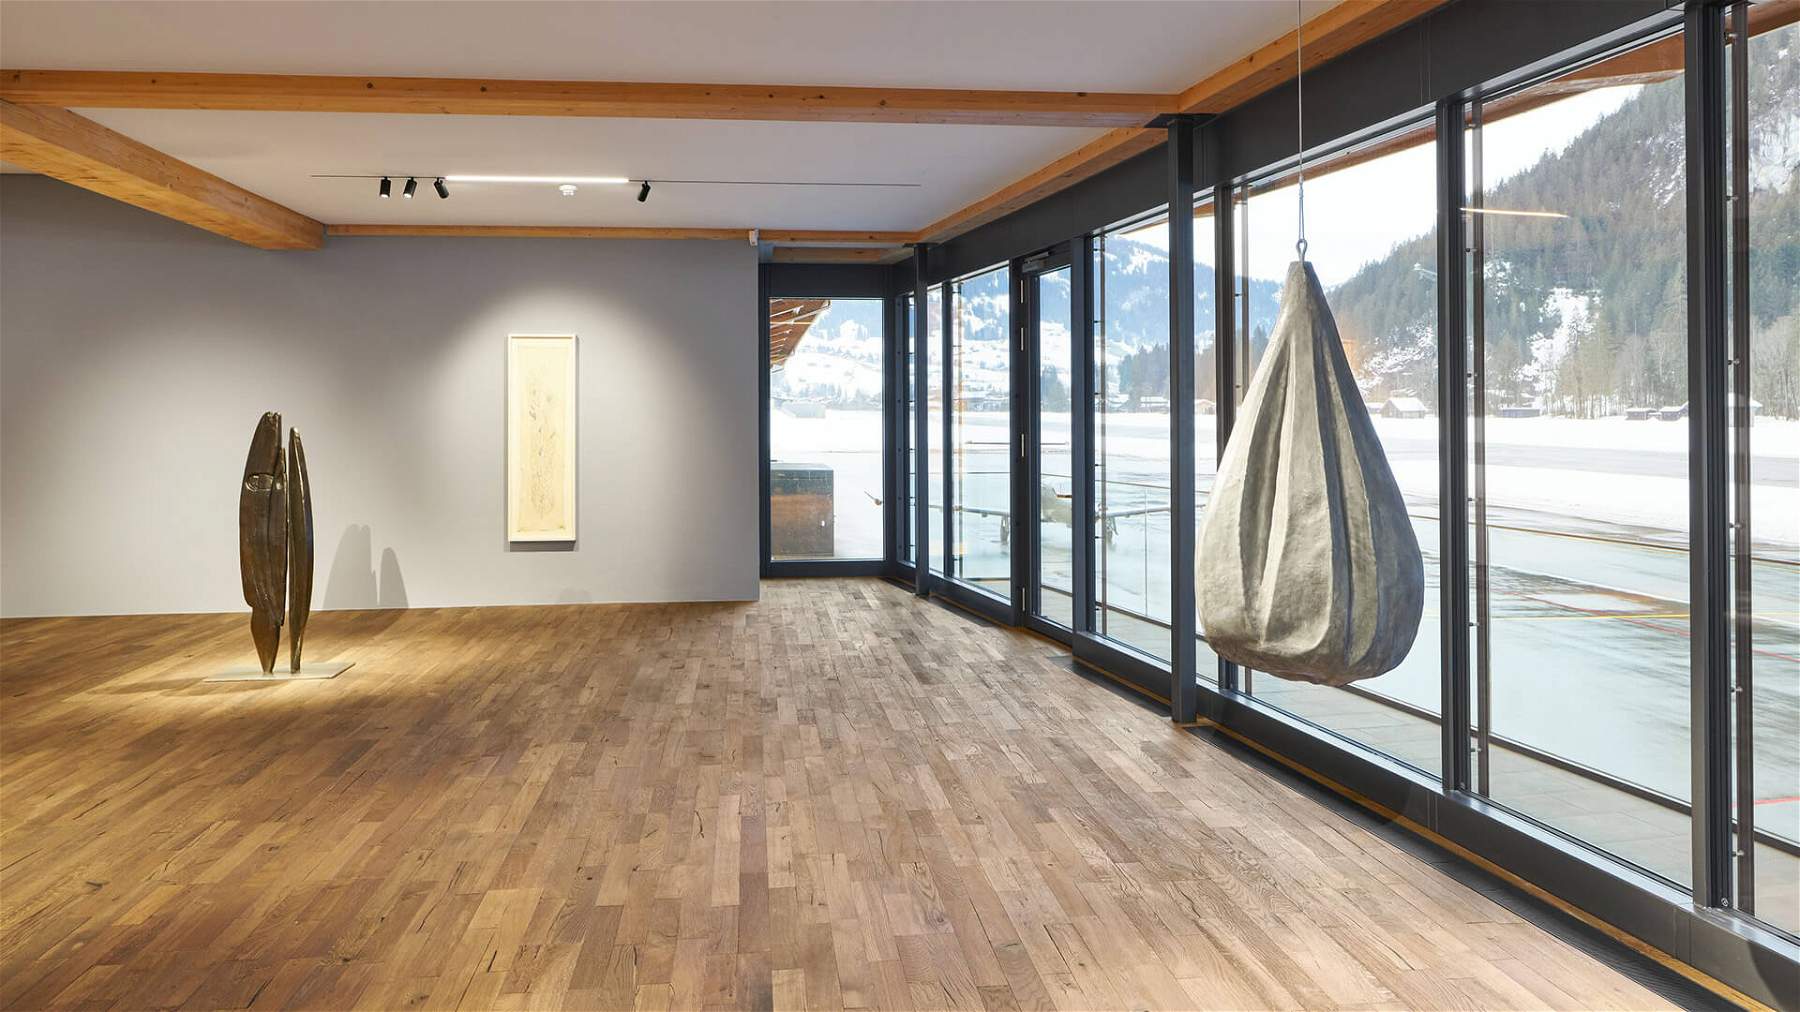 Switzerland, Hauser&Wirth dedicates an exhibition to Louise Bourgeois in the heart of the Alps